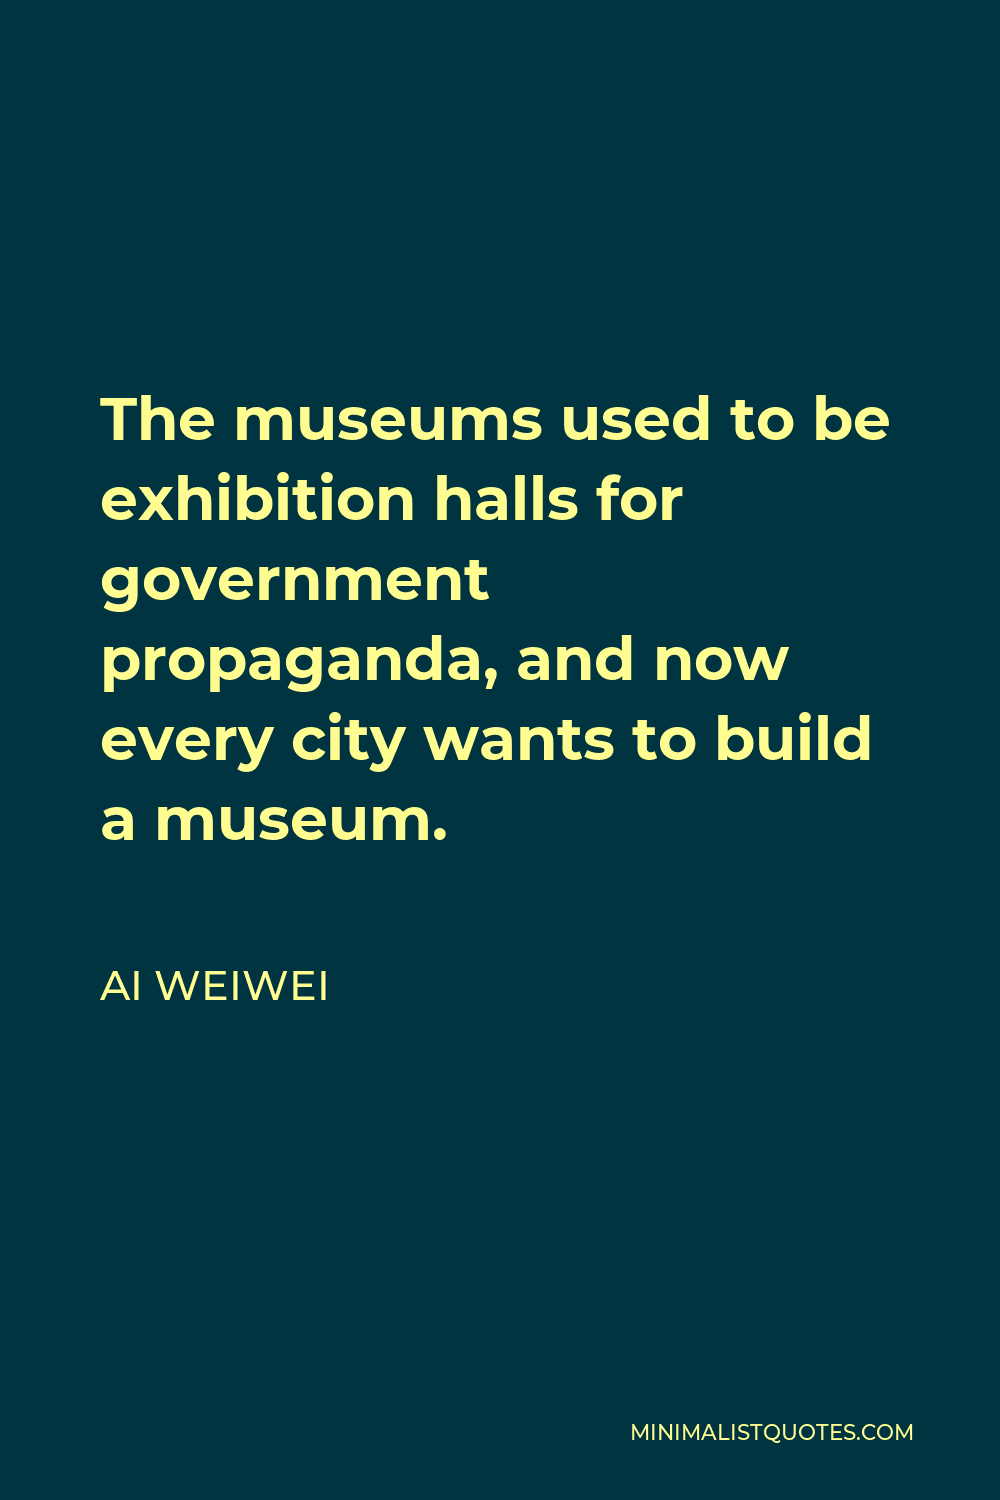 Ai Weiwei Quote - The museums used to be exhibition halls for government propaganda, and now every city wants to build a museum.